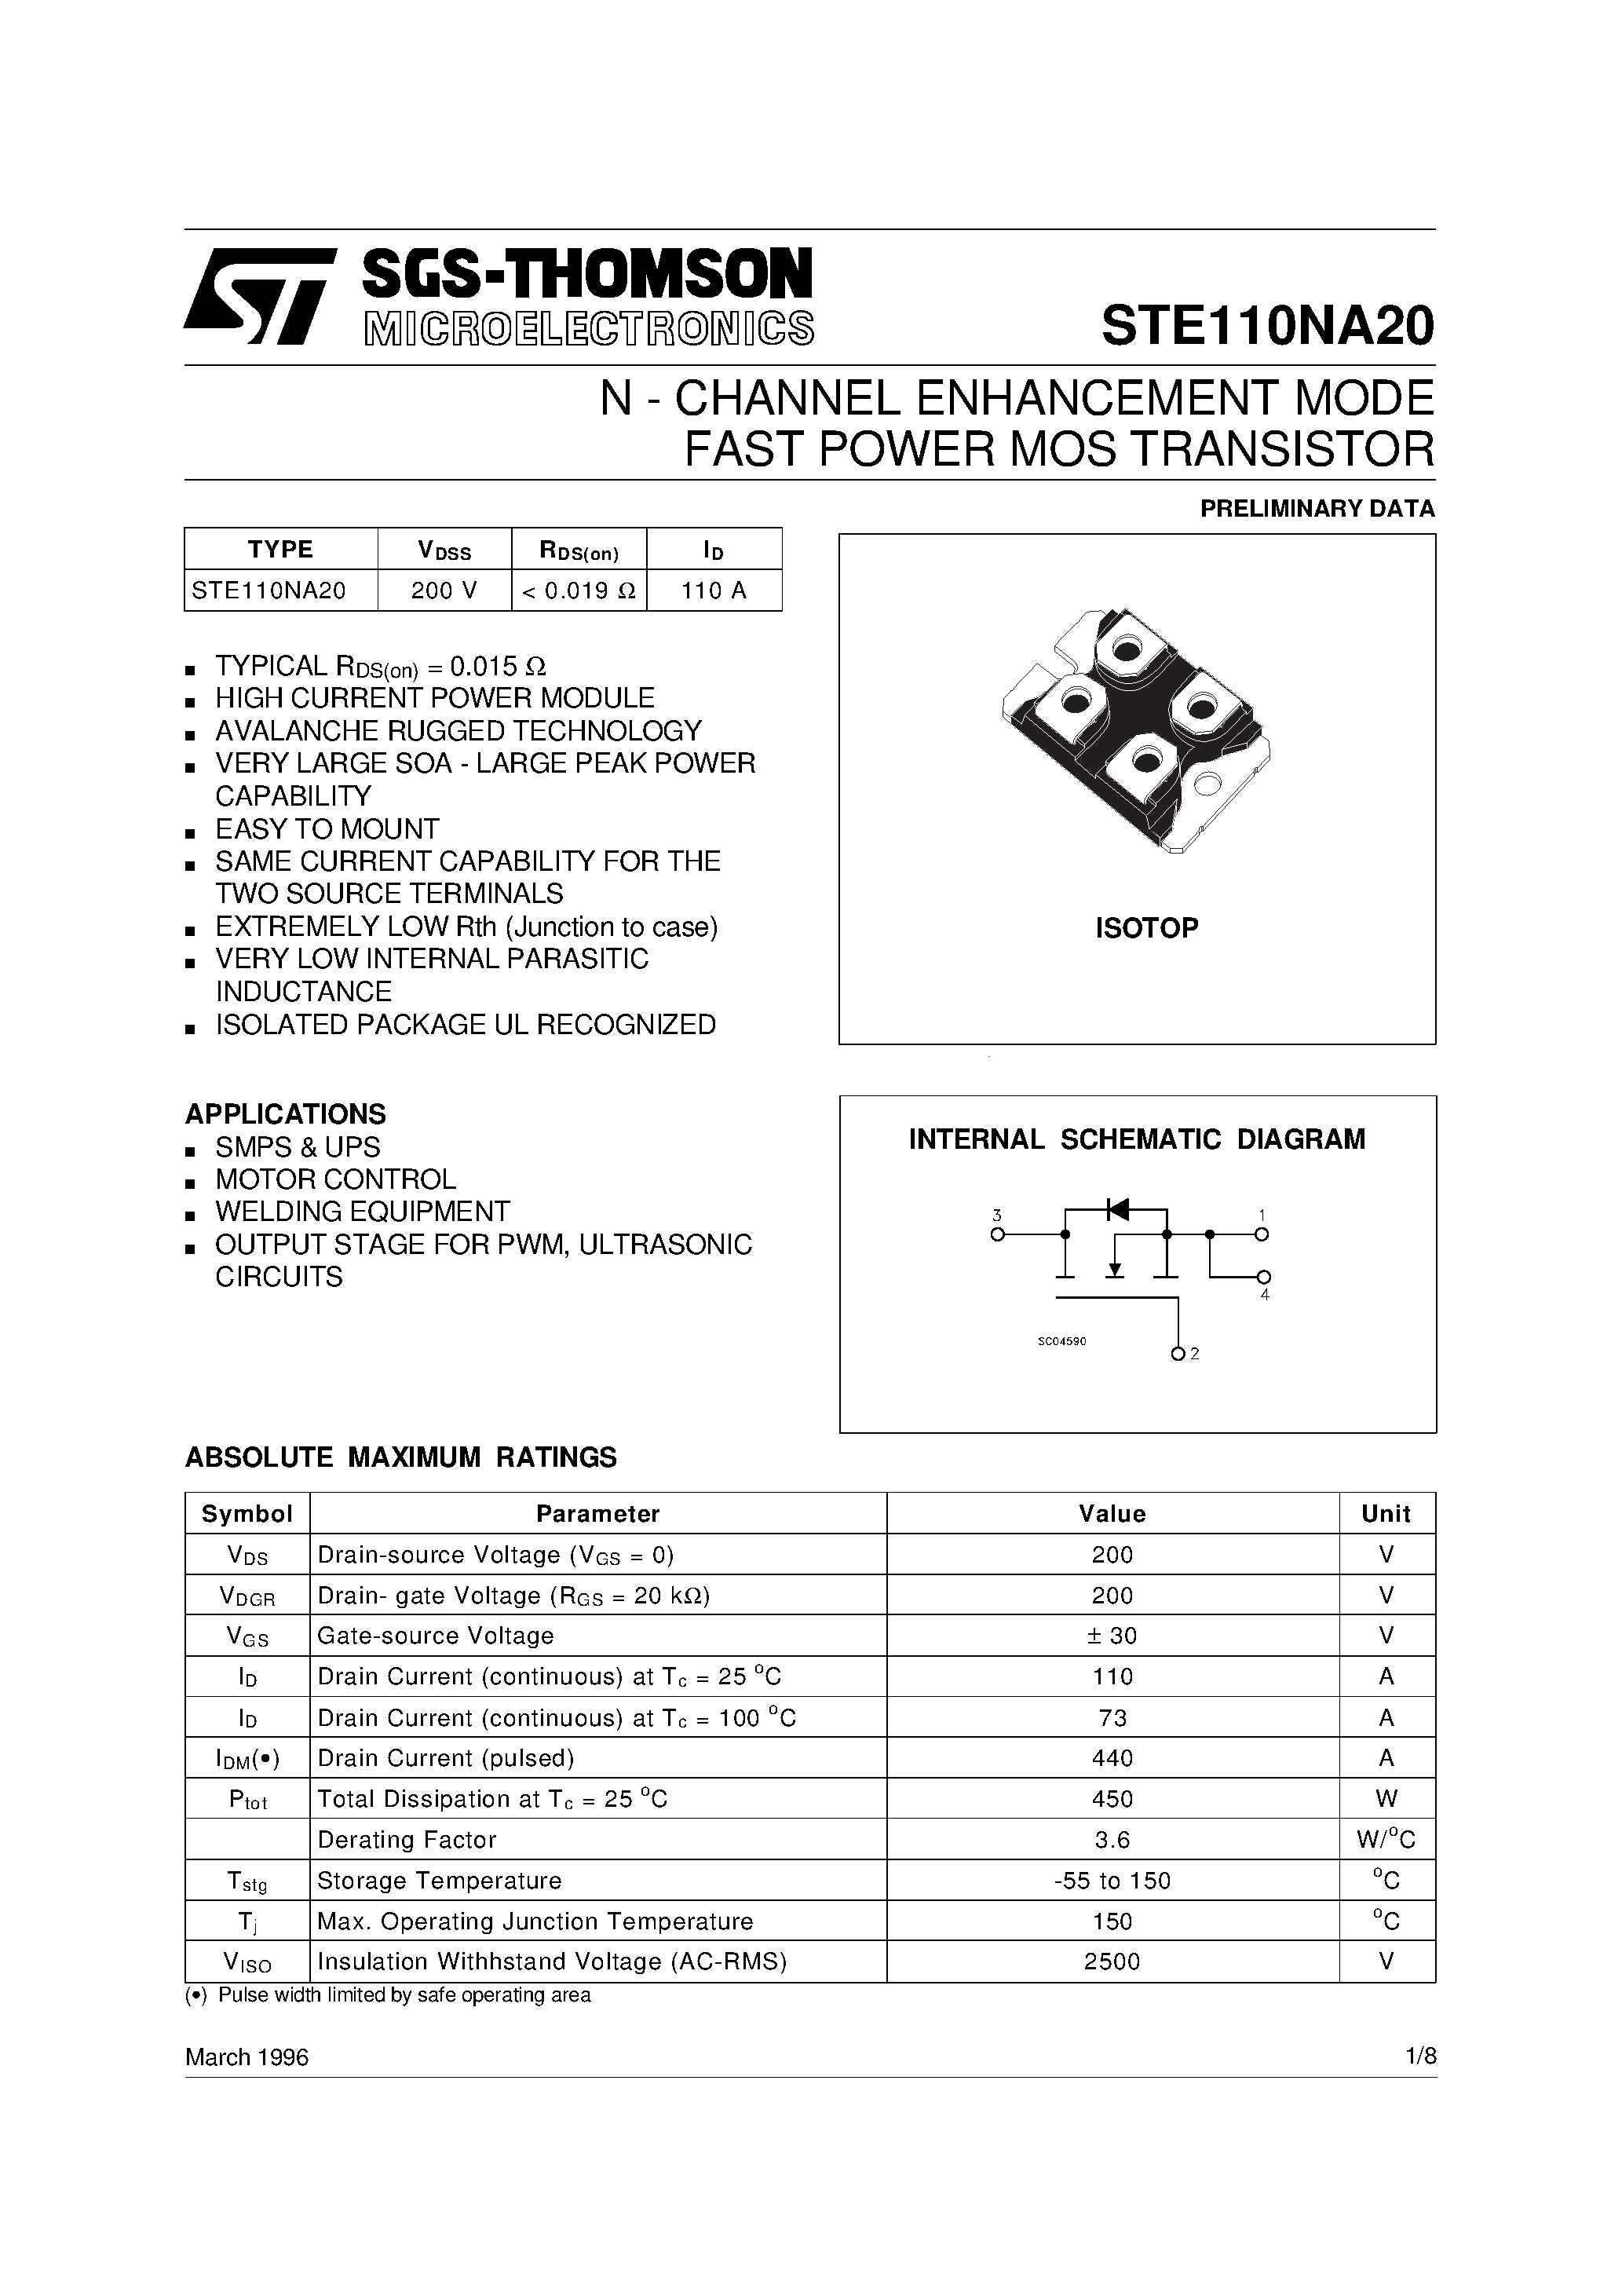 Datasheet STE110NA20 - N-CHANNEL ENHANCEMENT MODE FAST POWER MOS TRANSISTOR page 1